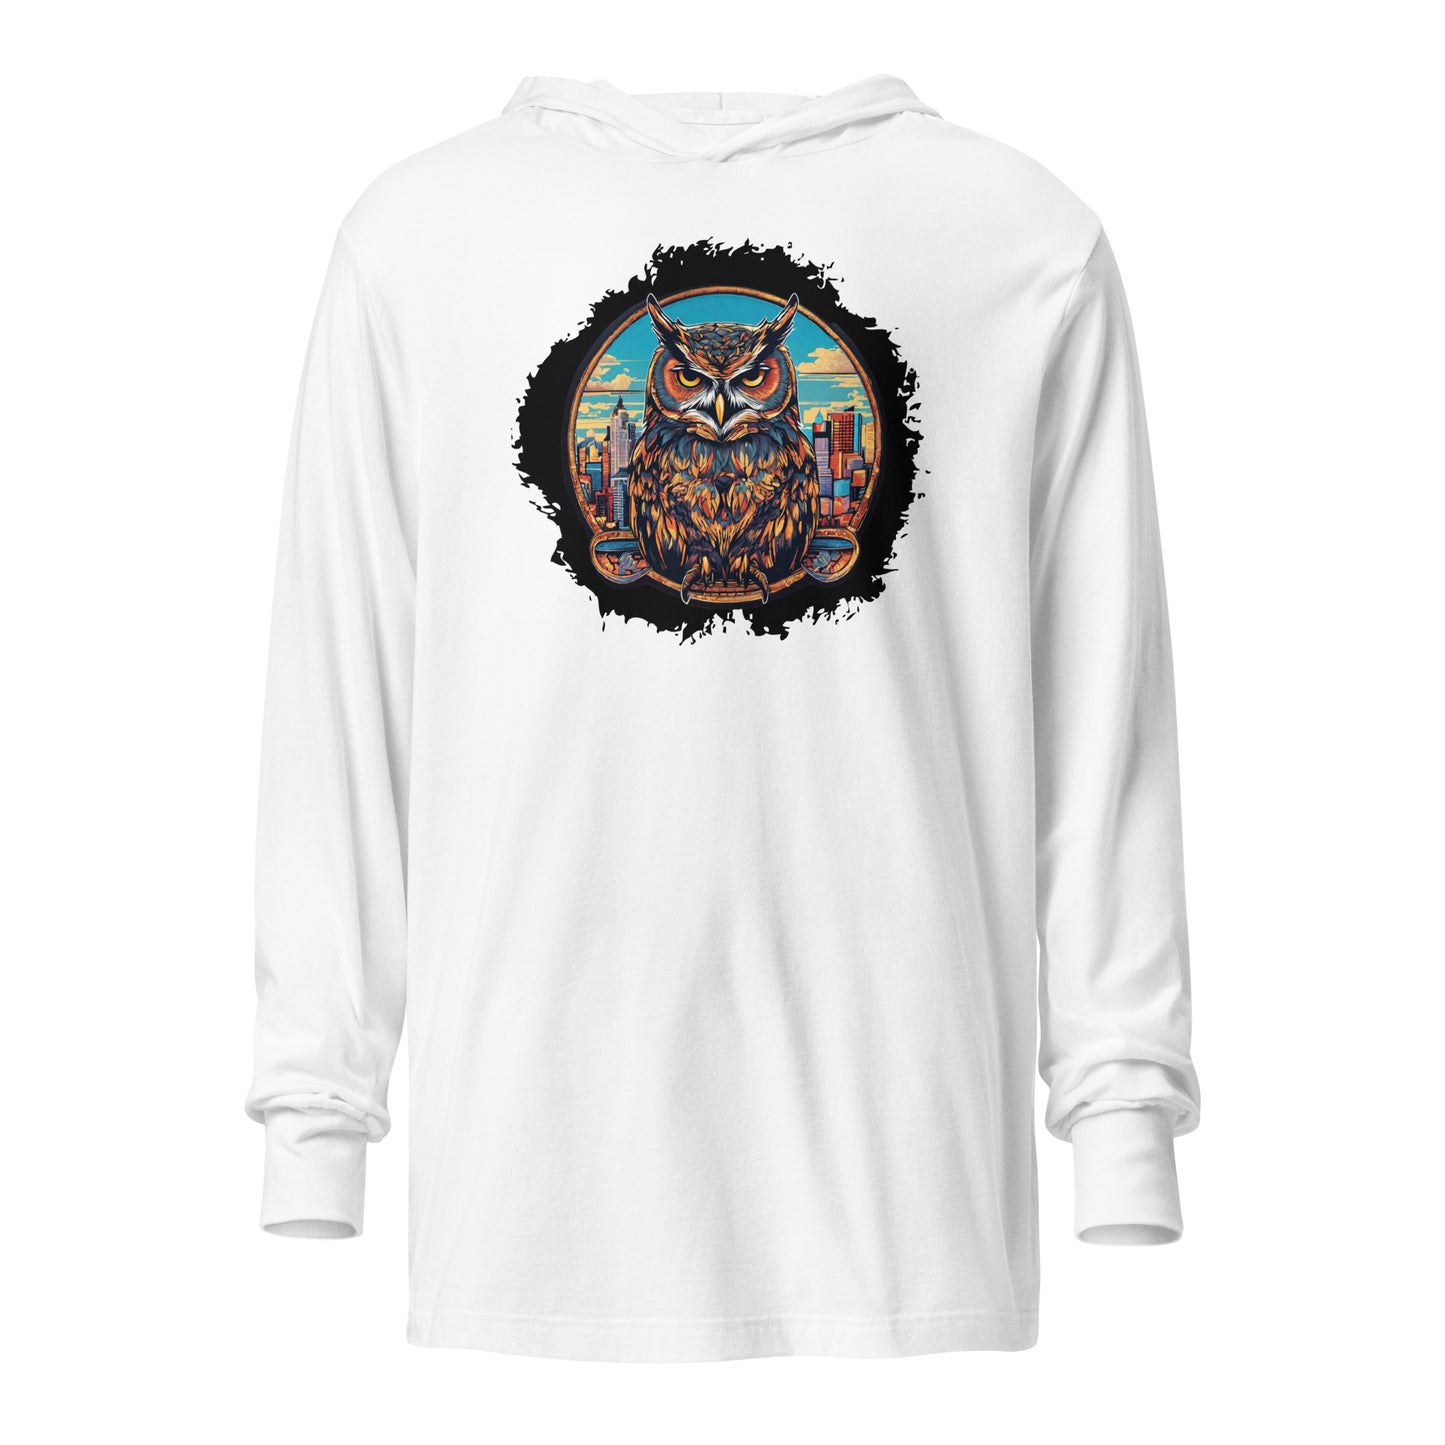 Owl in the City Emblem Hooded Long-Sleeve Tee White